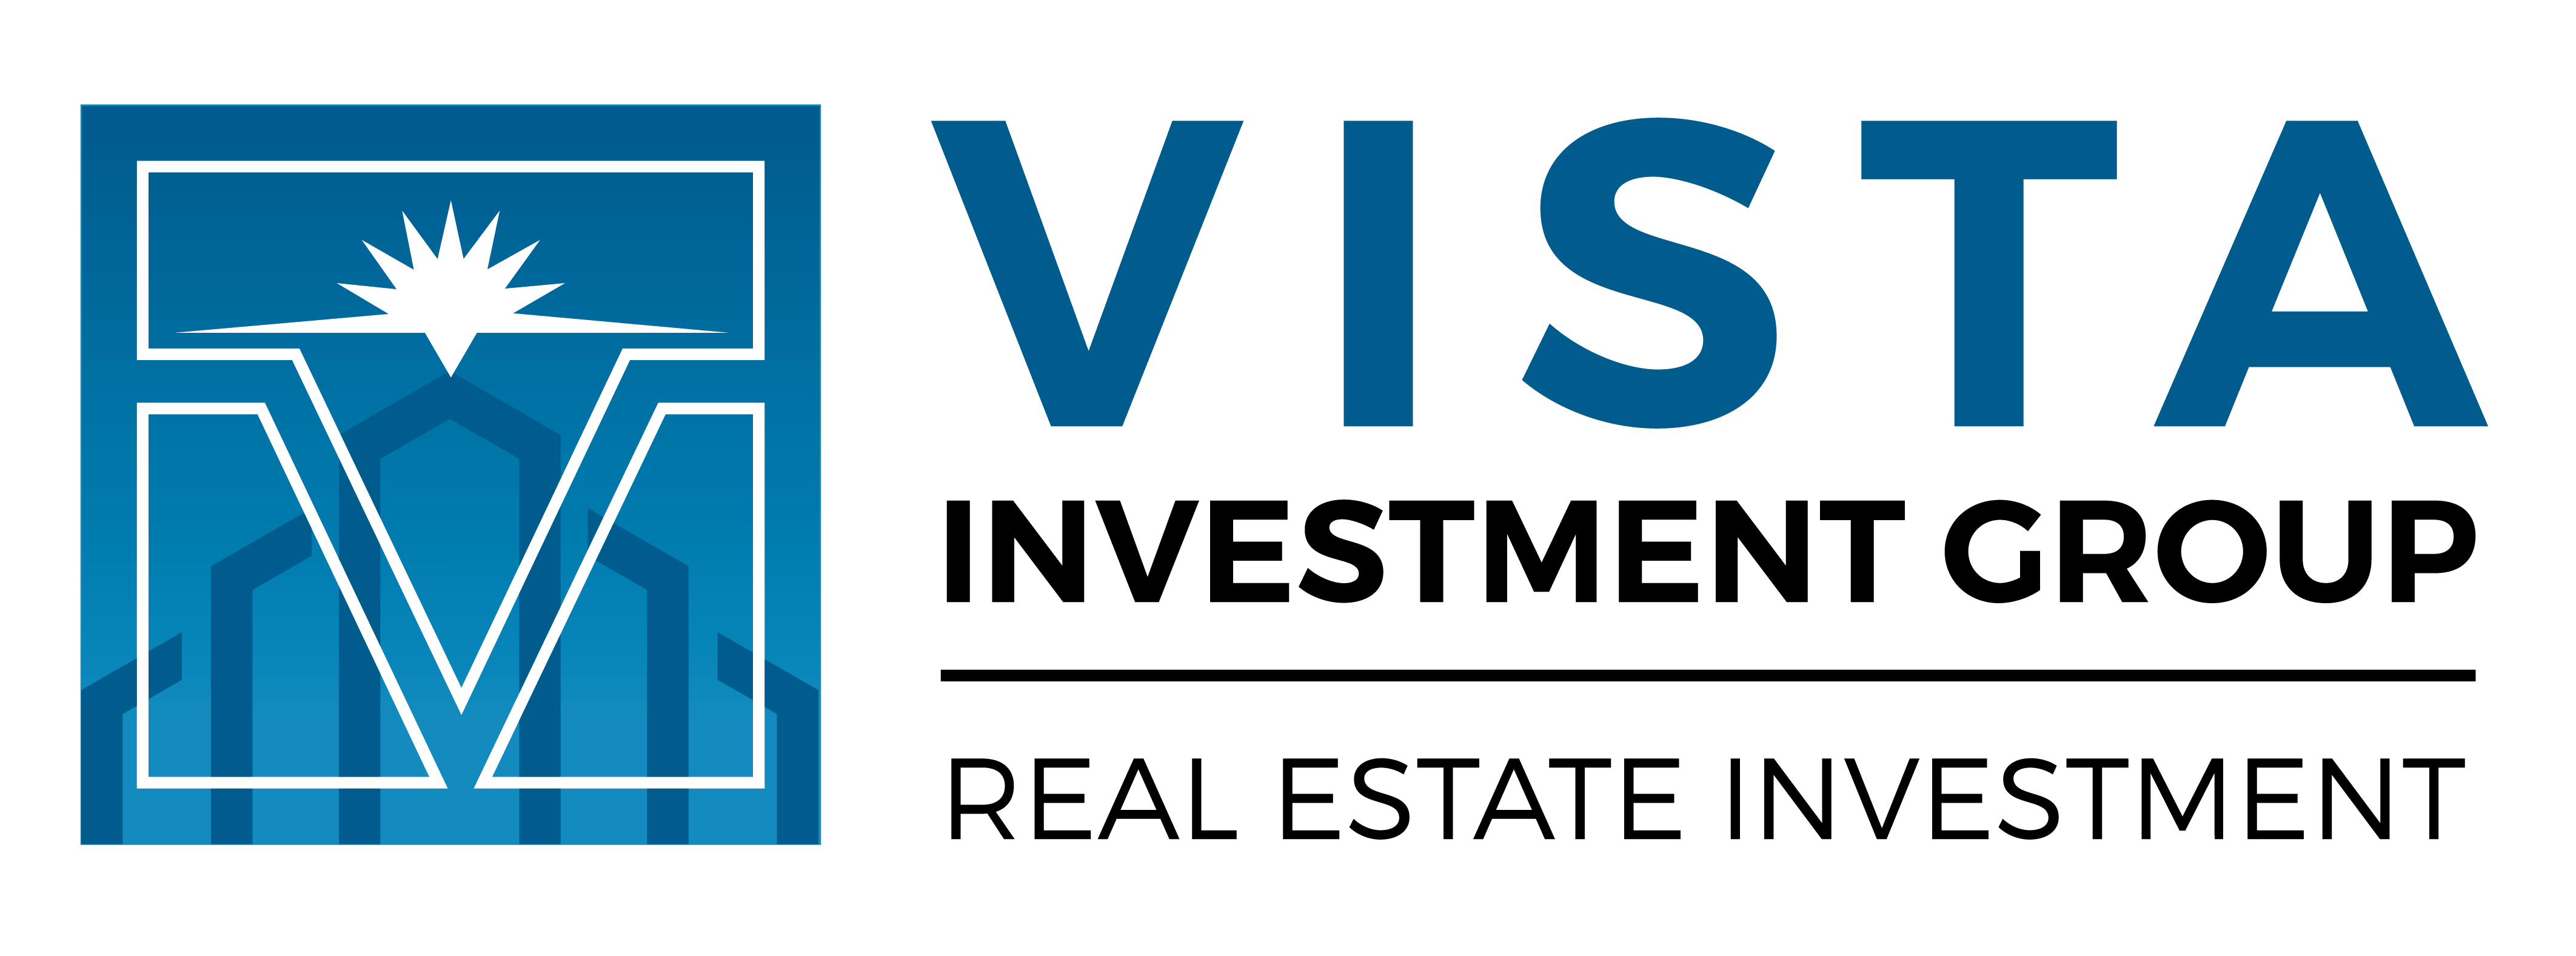 U. S. Invesments Company Logo - Vista Investment Group - About Us